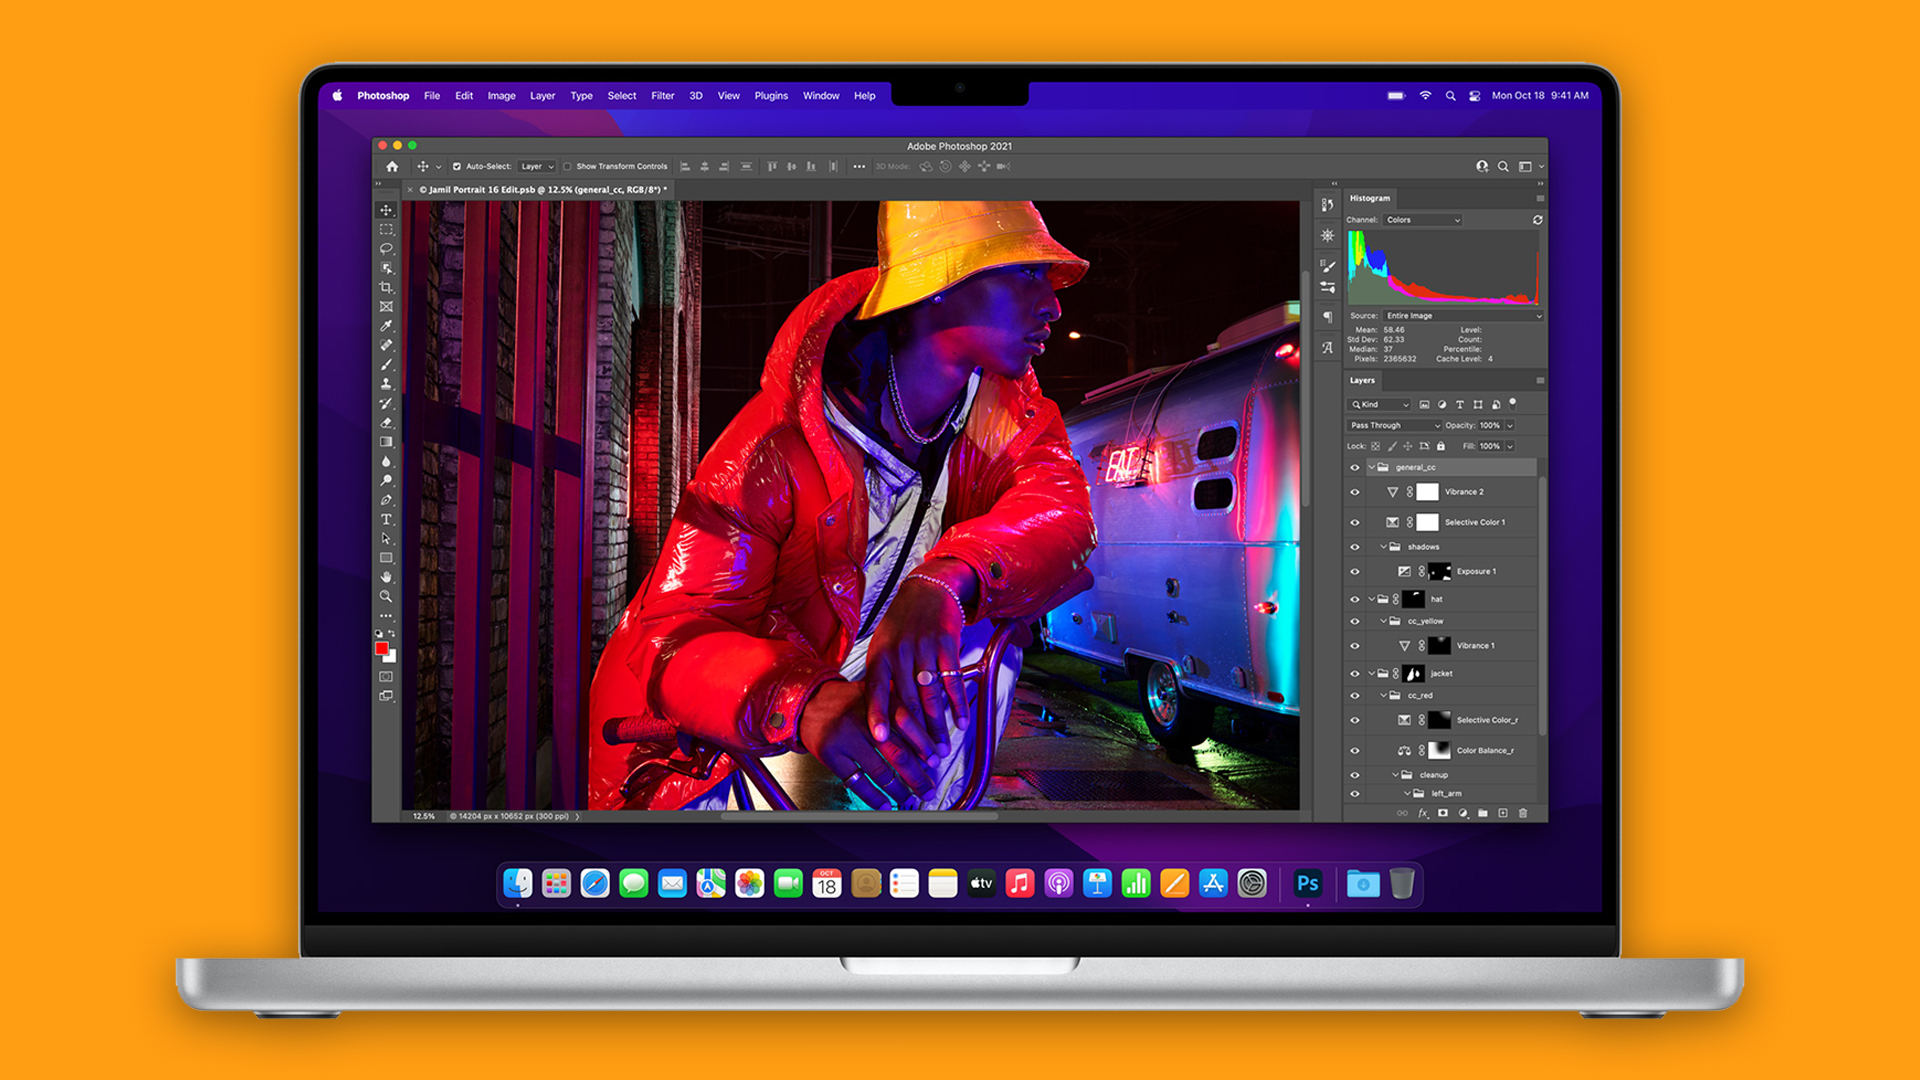 Download Photoshop: how to get Adobe Photoshop free or with Creative Cloud